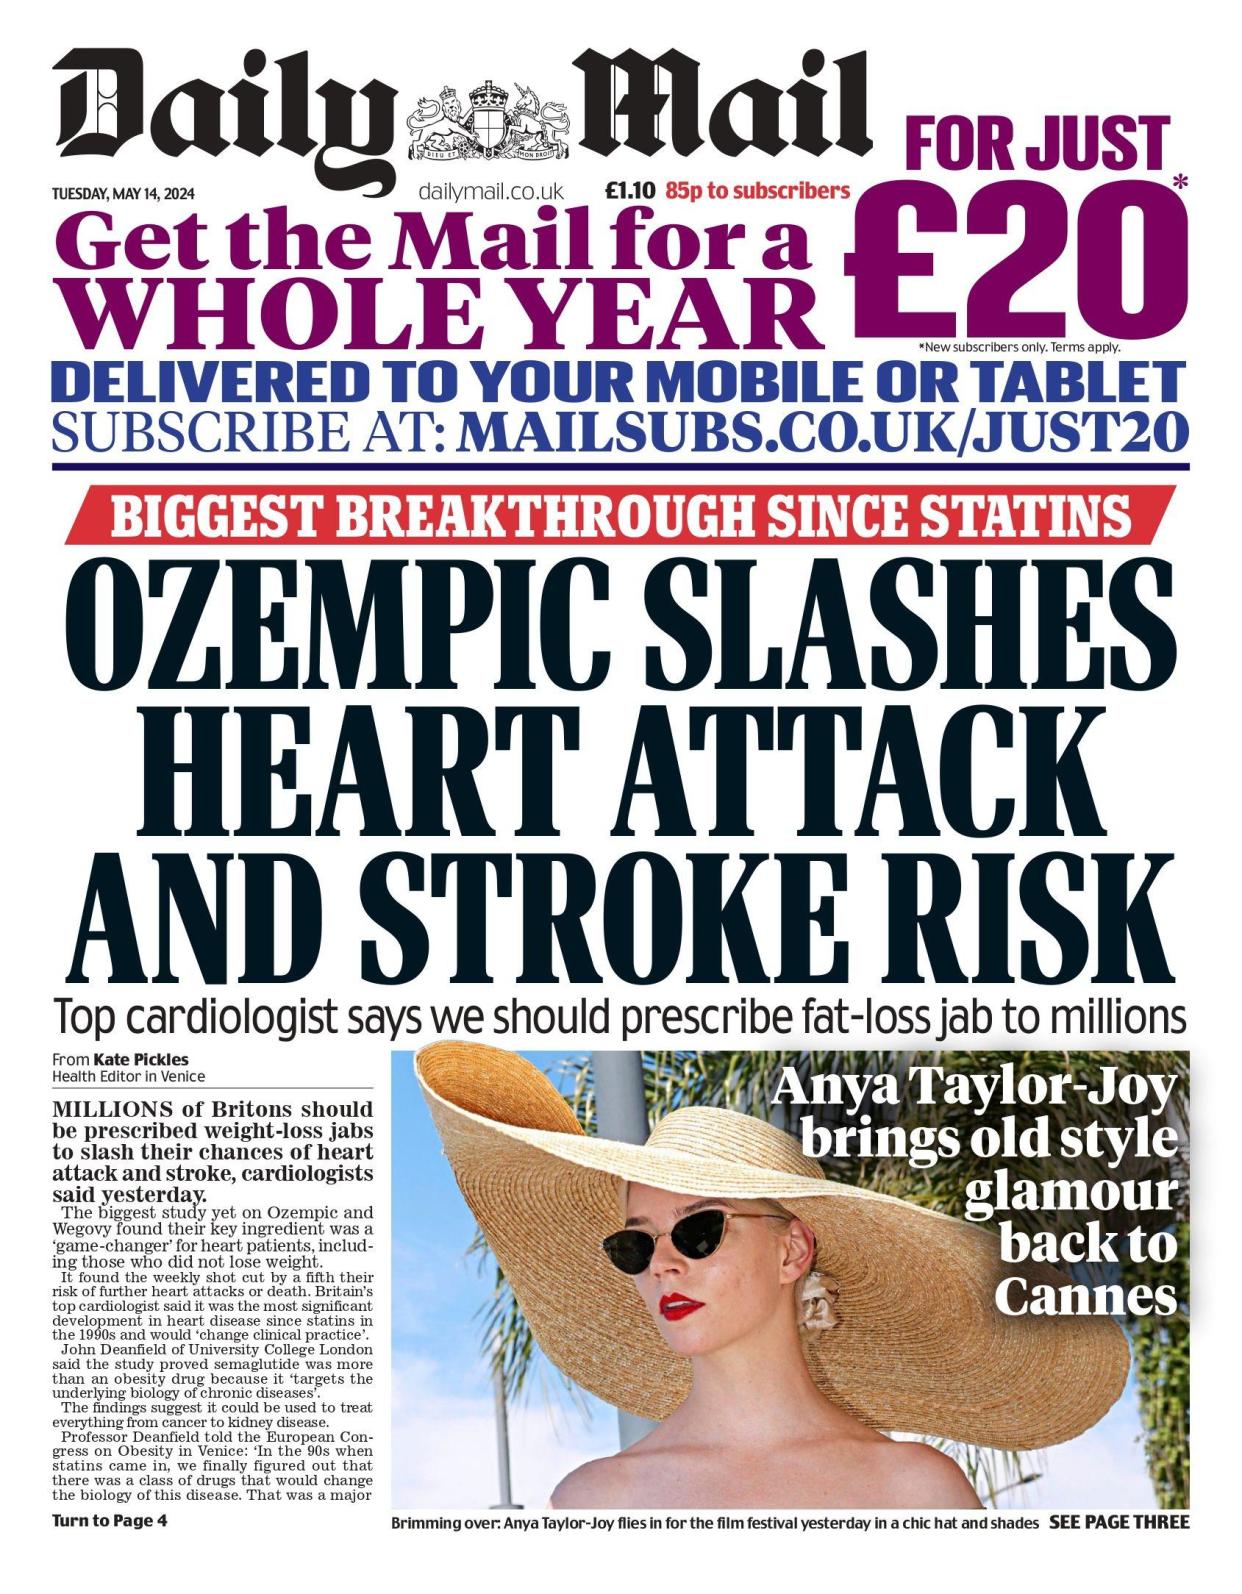 Daily Mail's main story on Tuesday claims an Ozempic drug can slash heart attack and stroke risks